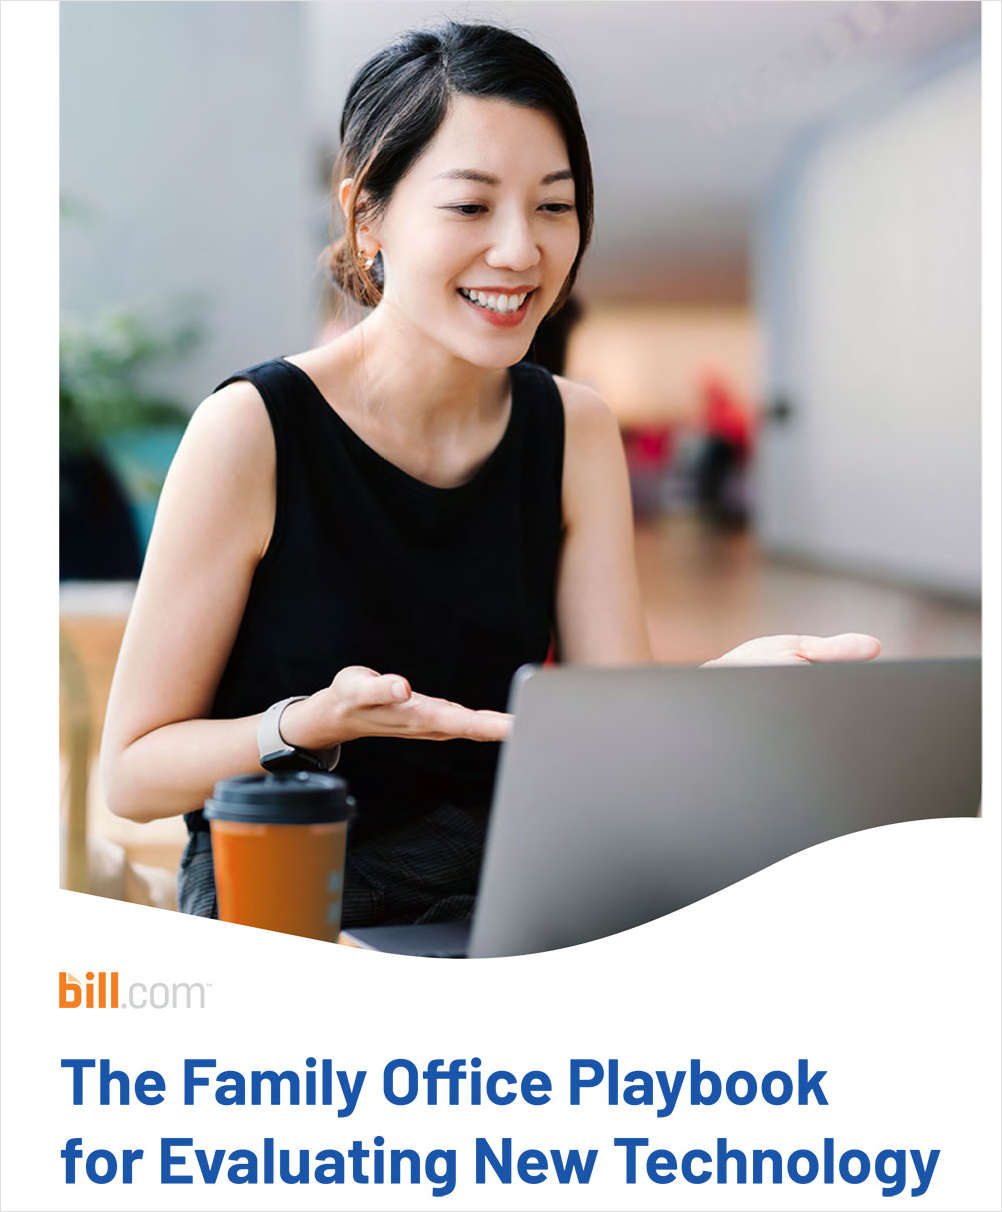 The Family Office Playbook for Evaluating New Technology